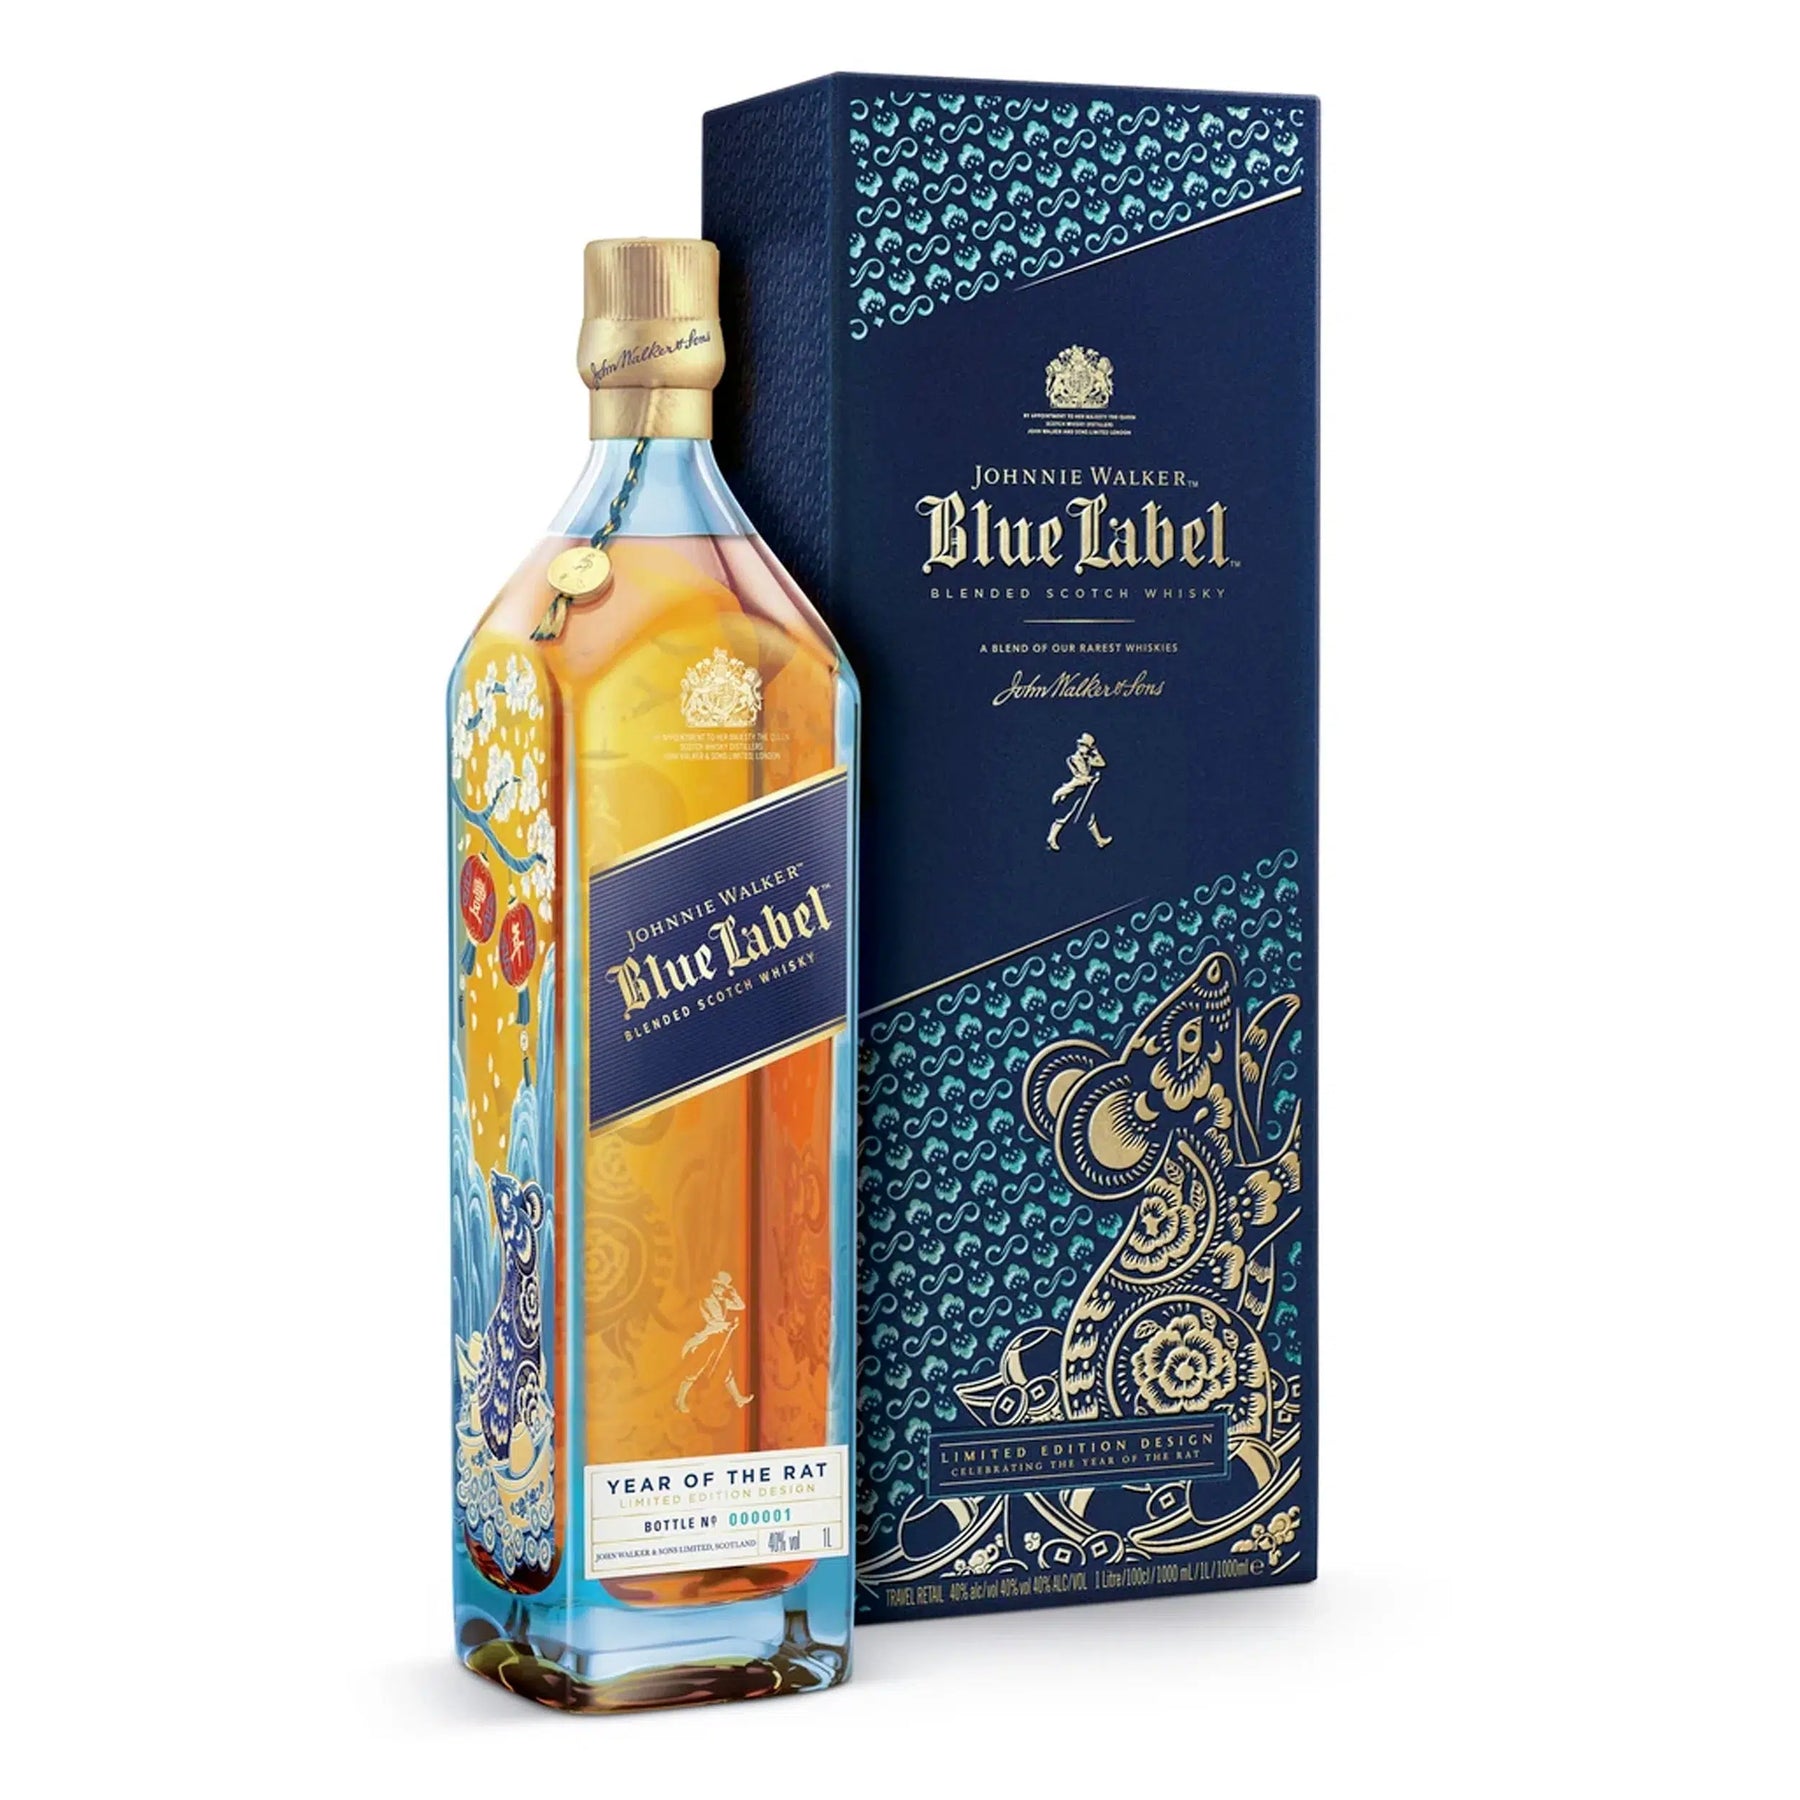 Johnnie Walker Blue Label Year of the Rat Blended Scotch Whisky 1L